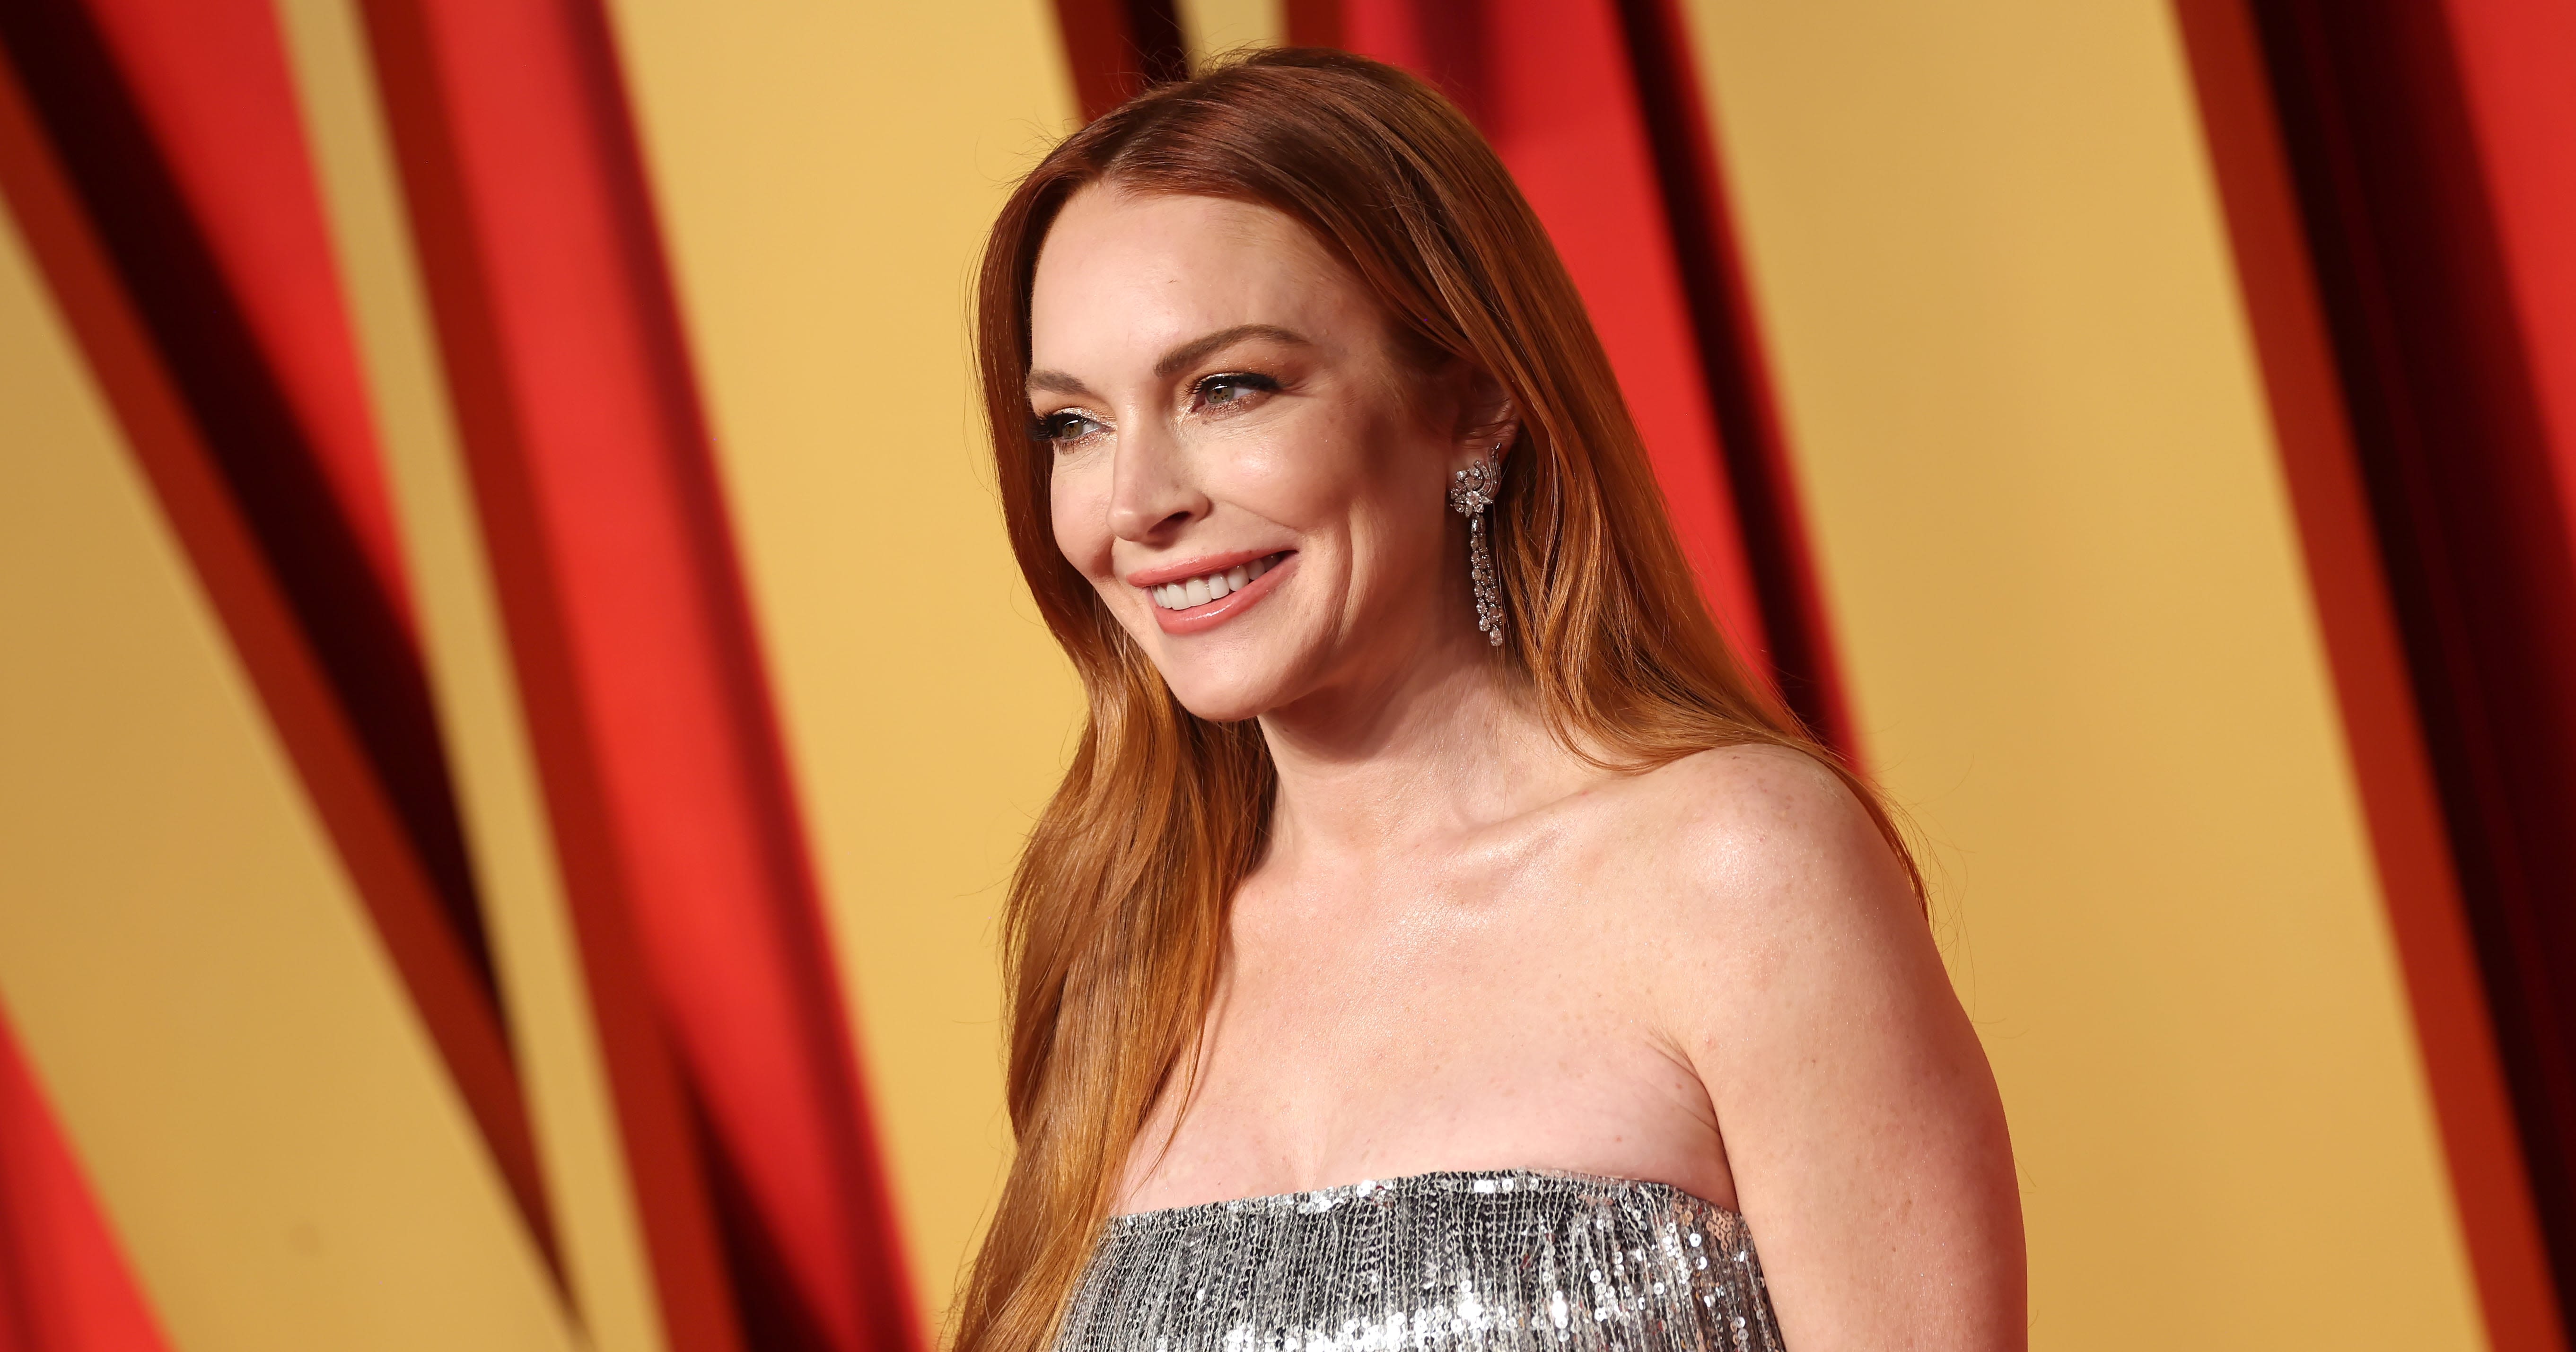 Lindsay Lohan Shares the "Fitting" Movie She's Most Excited to Show Her Son